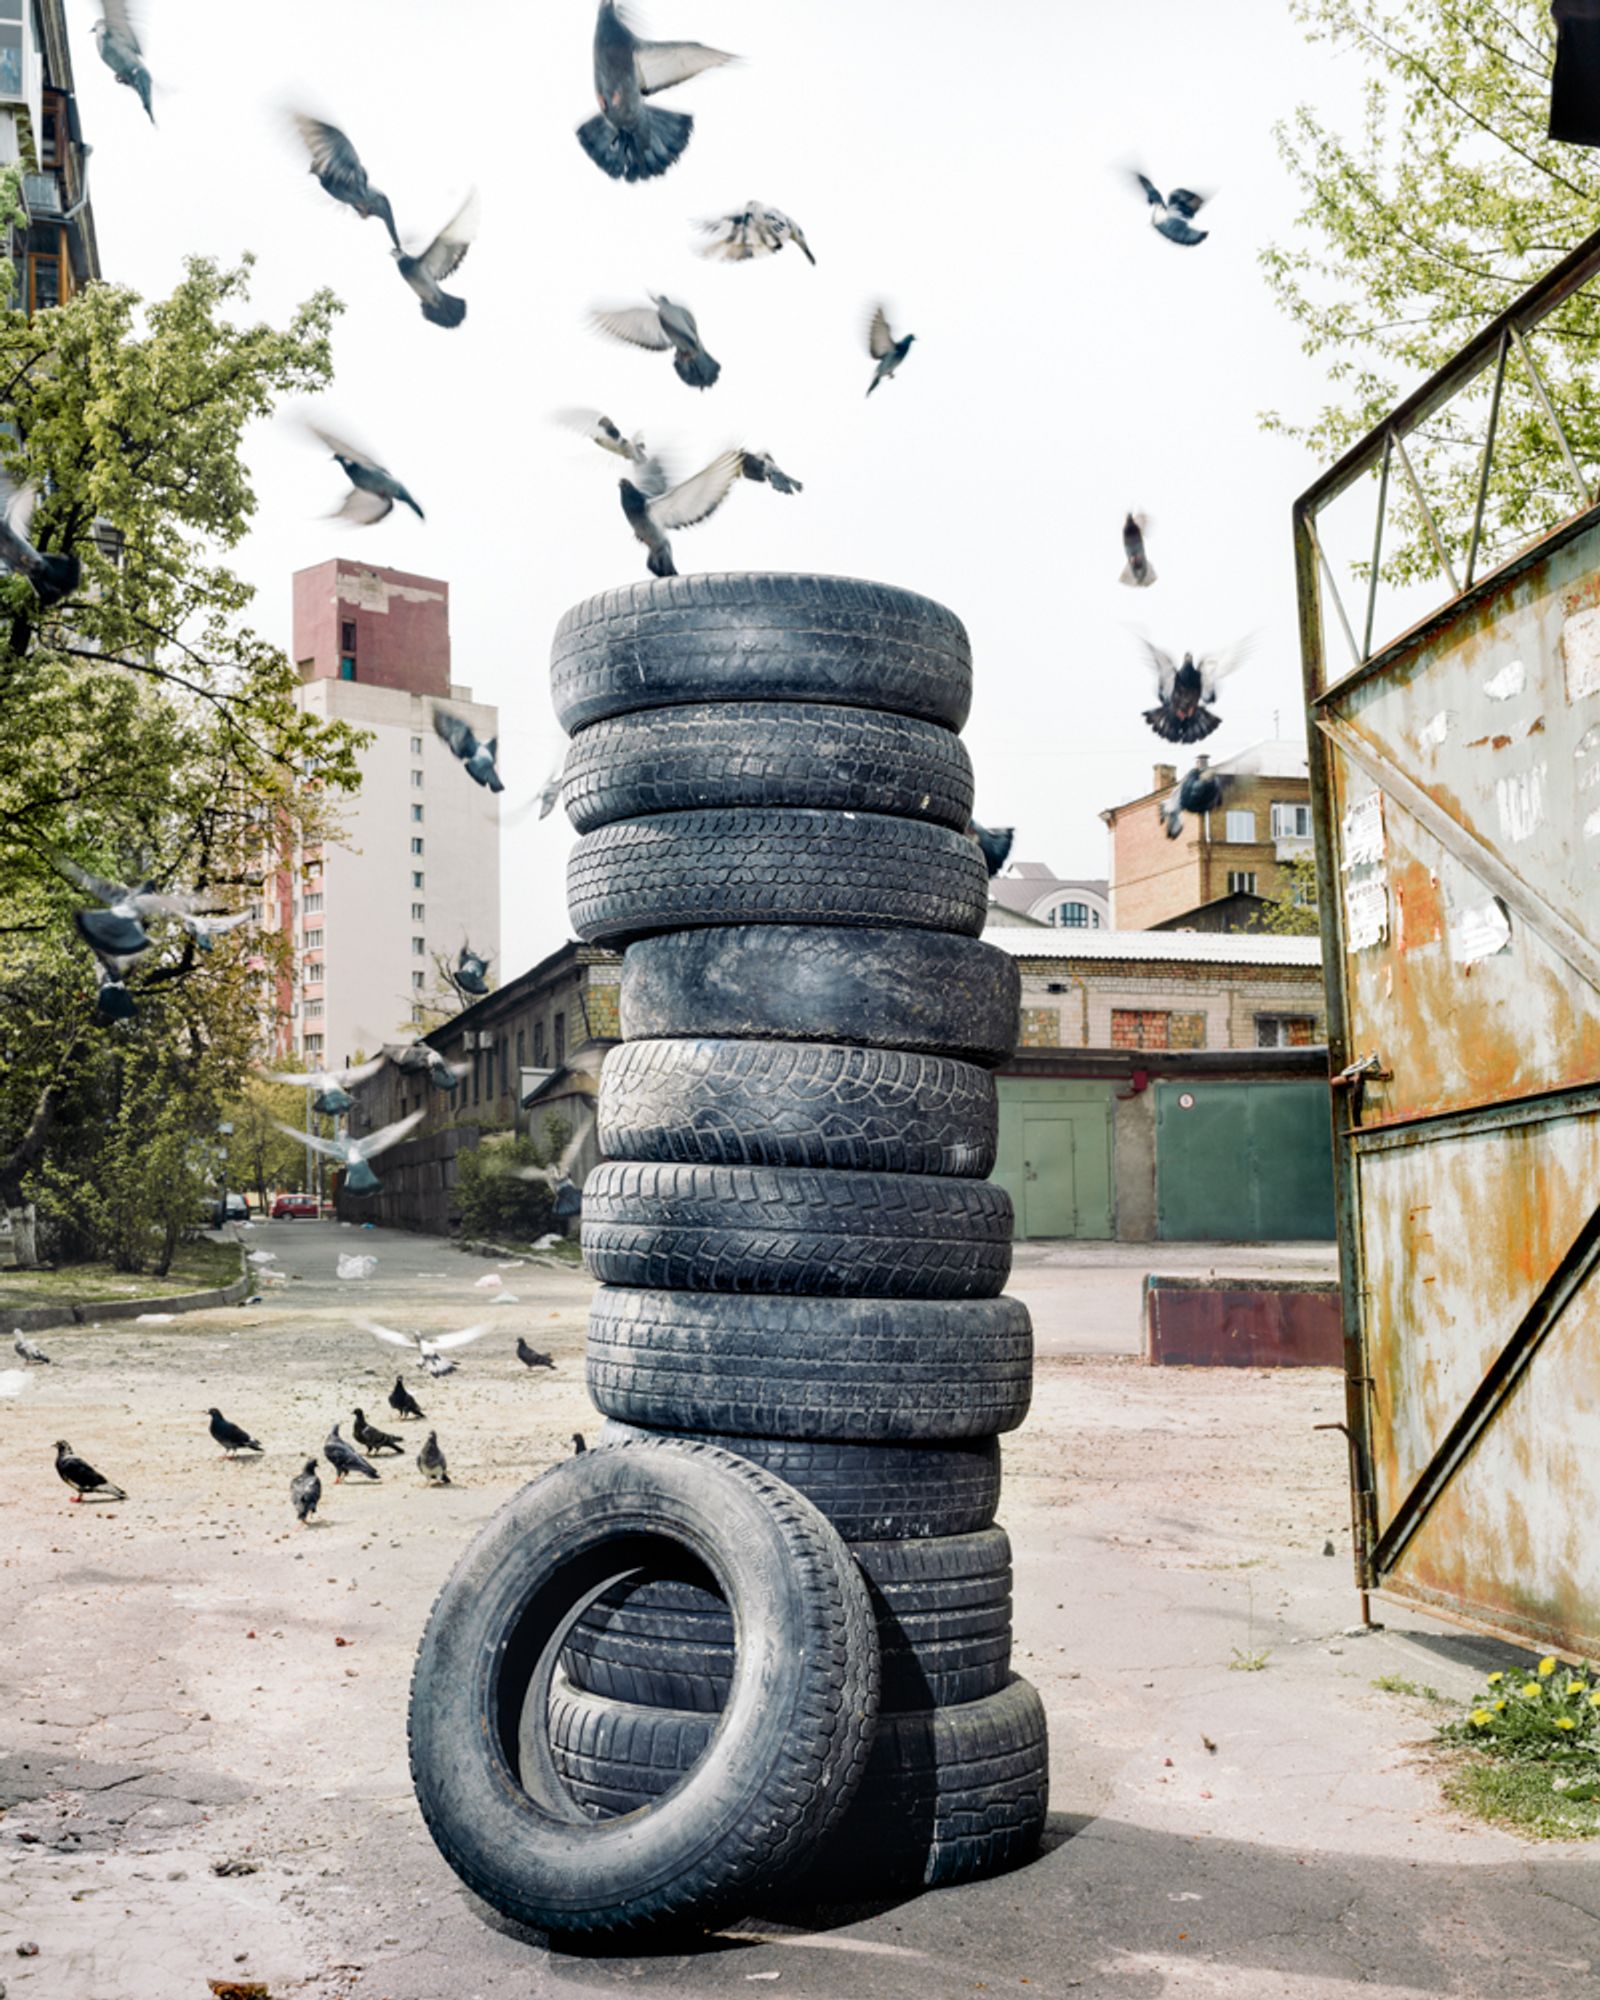 © David Denil - A pile of tires as part of a revolution